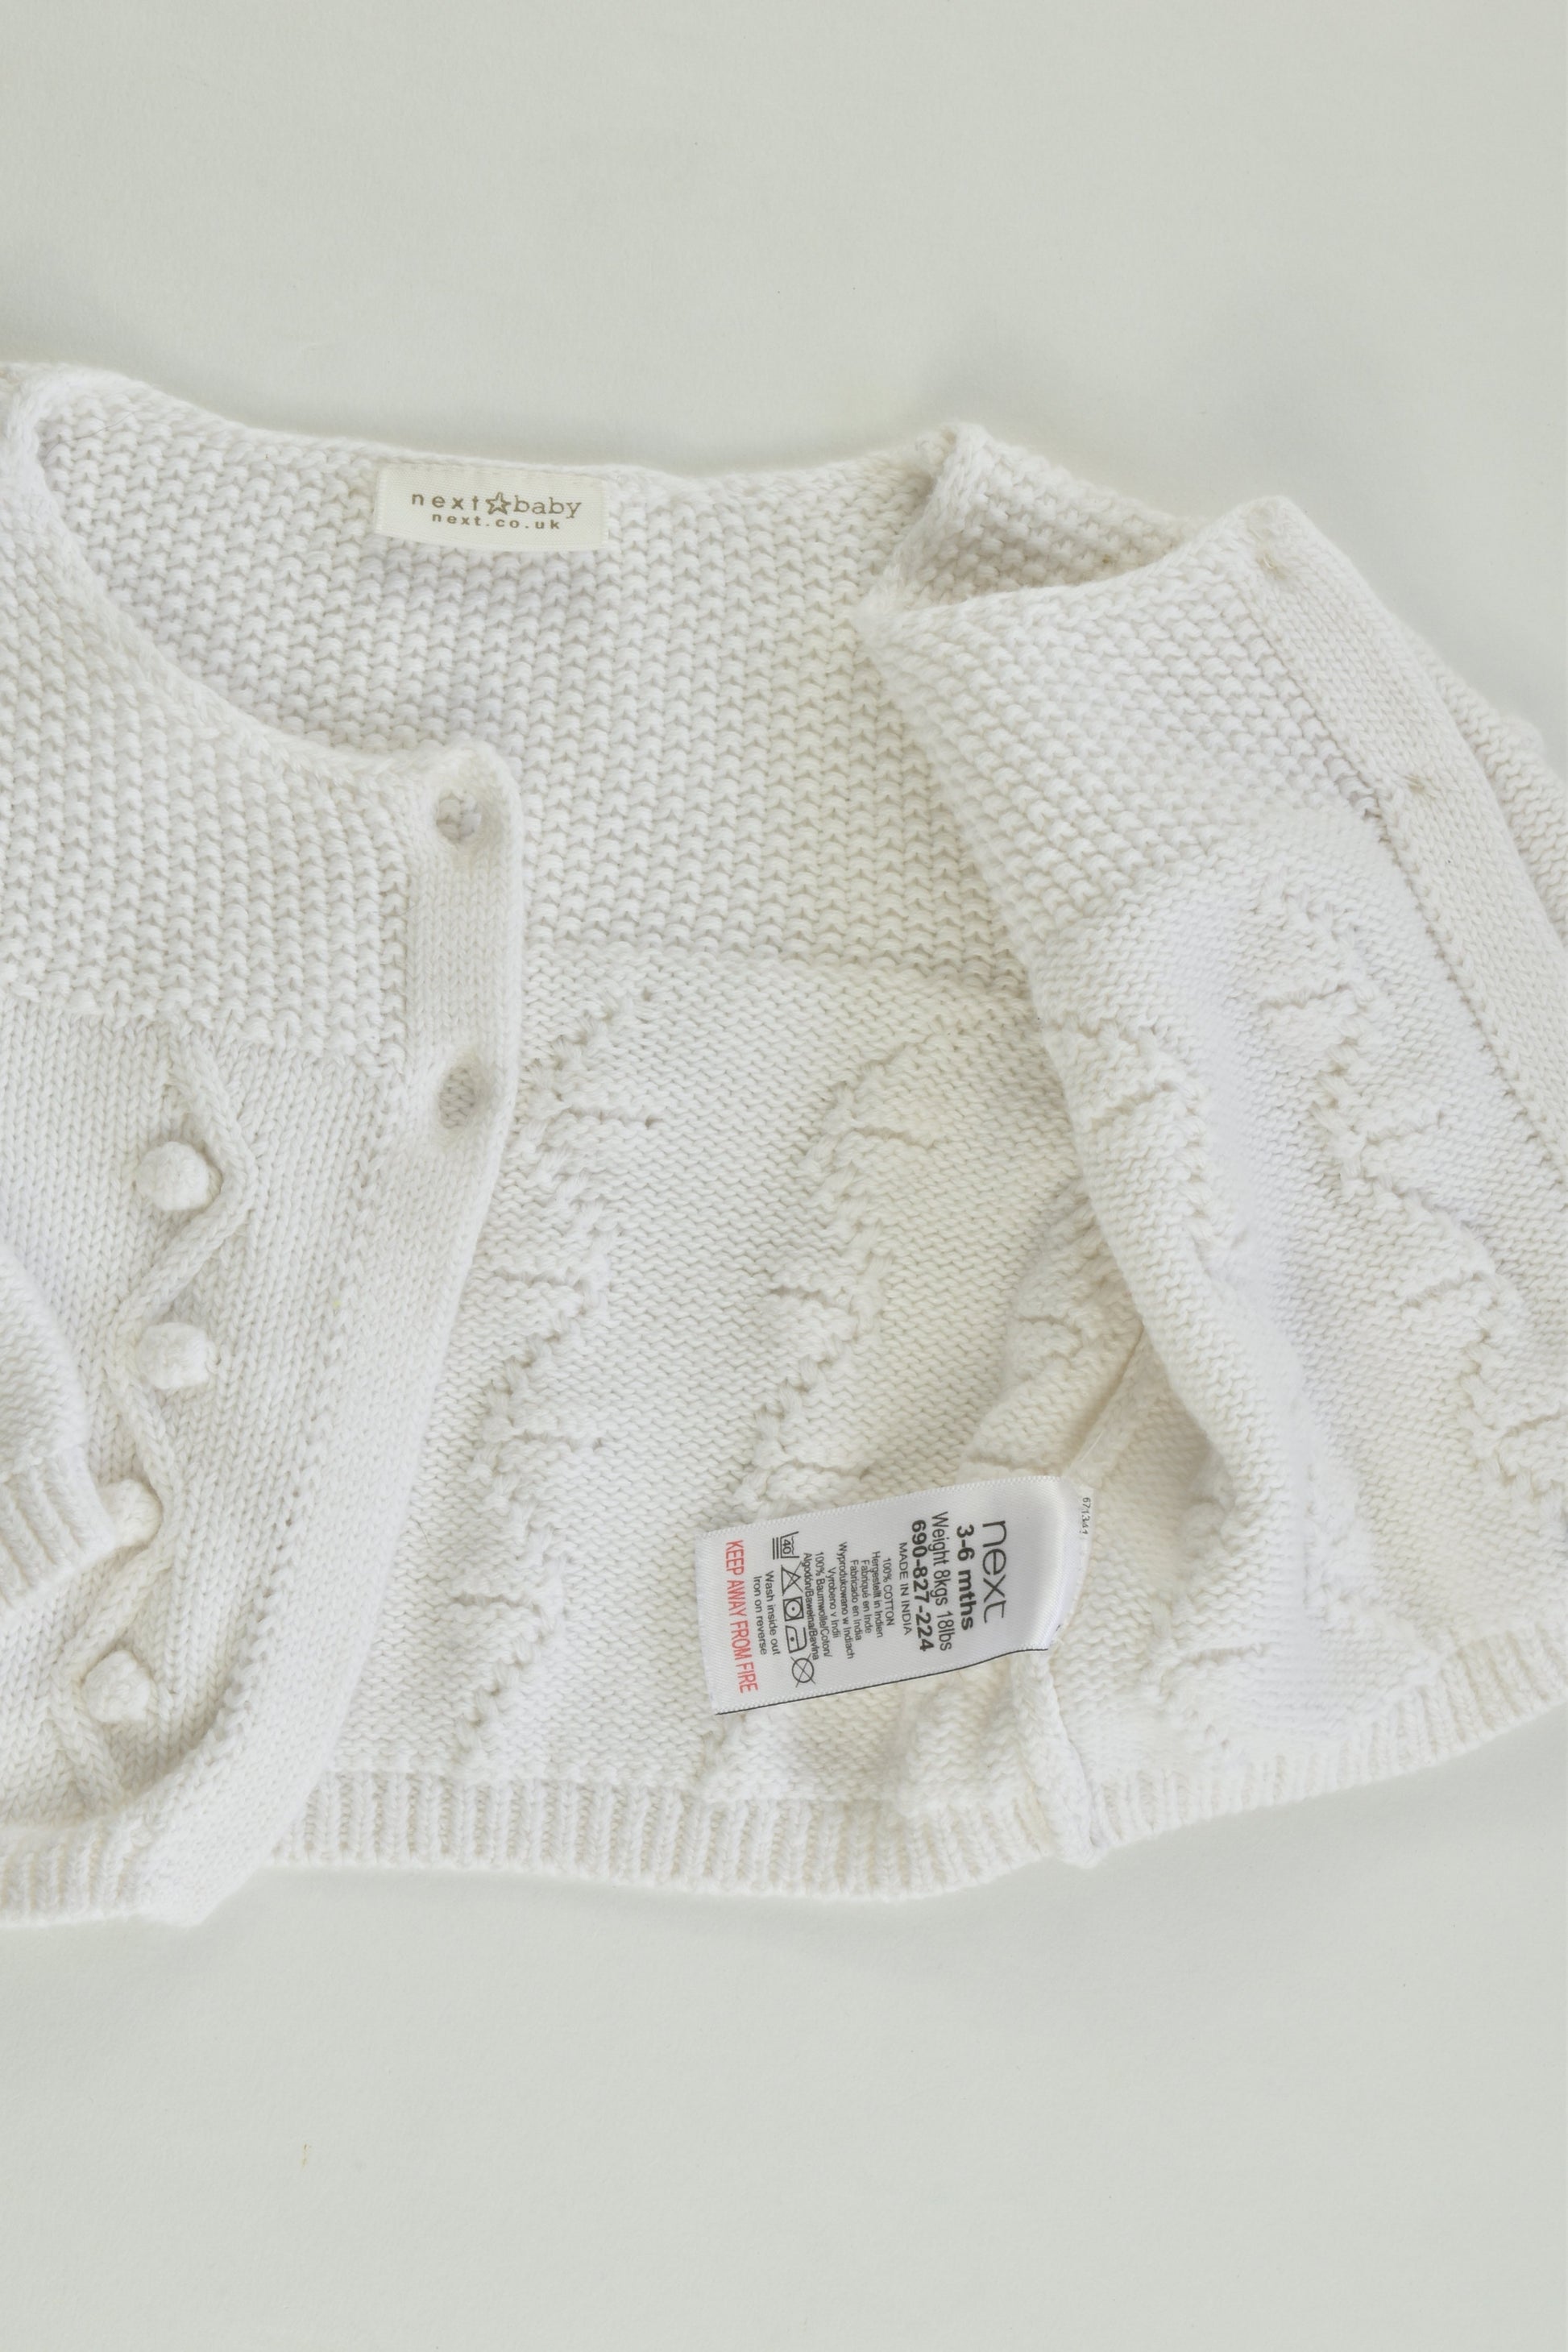 Next (UK) Size 00 (3-6 months) Knitted Cardigan